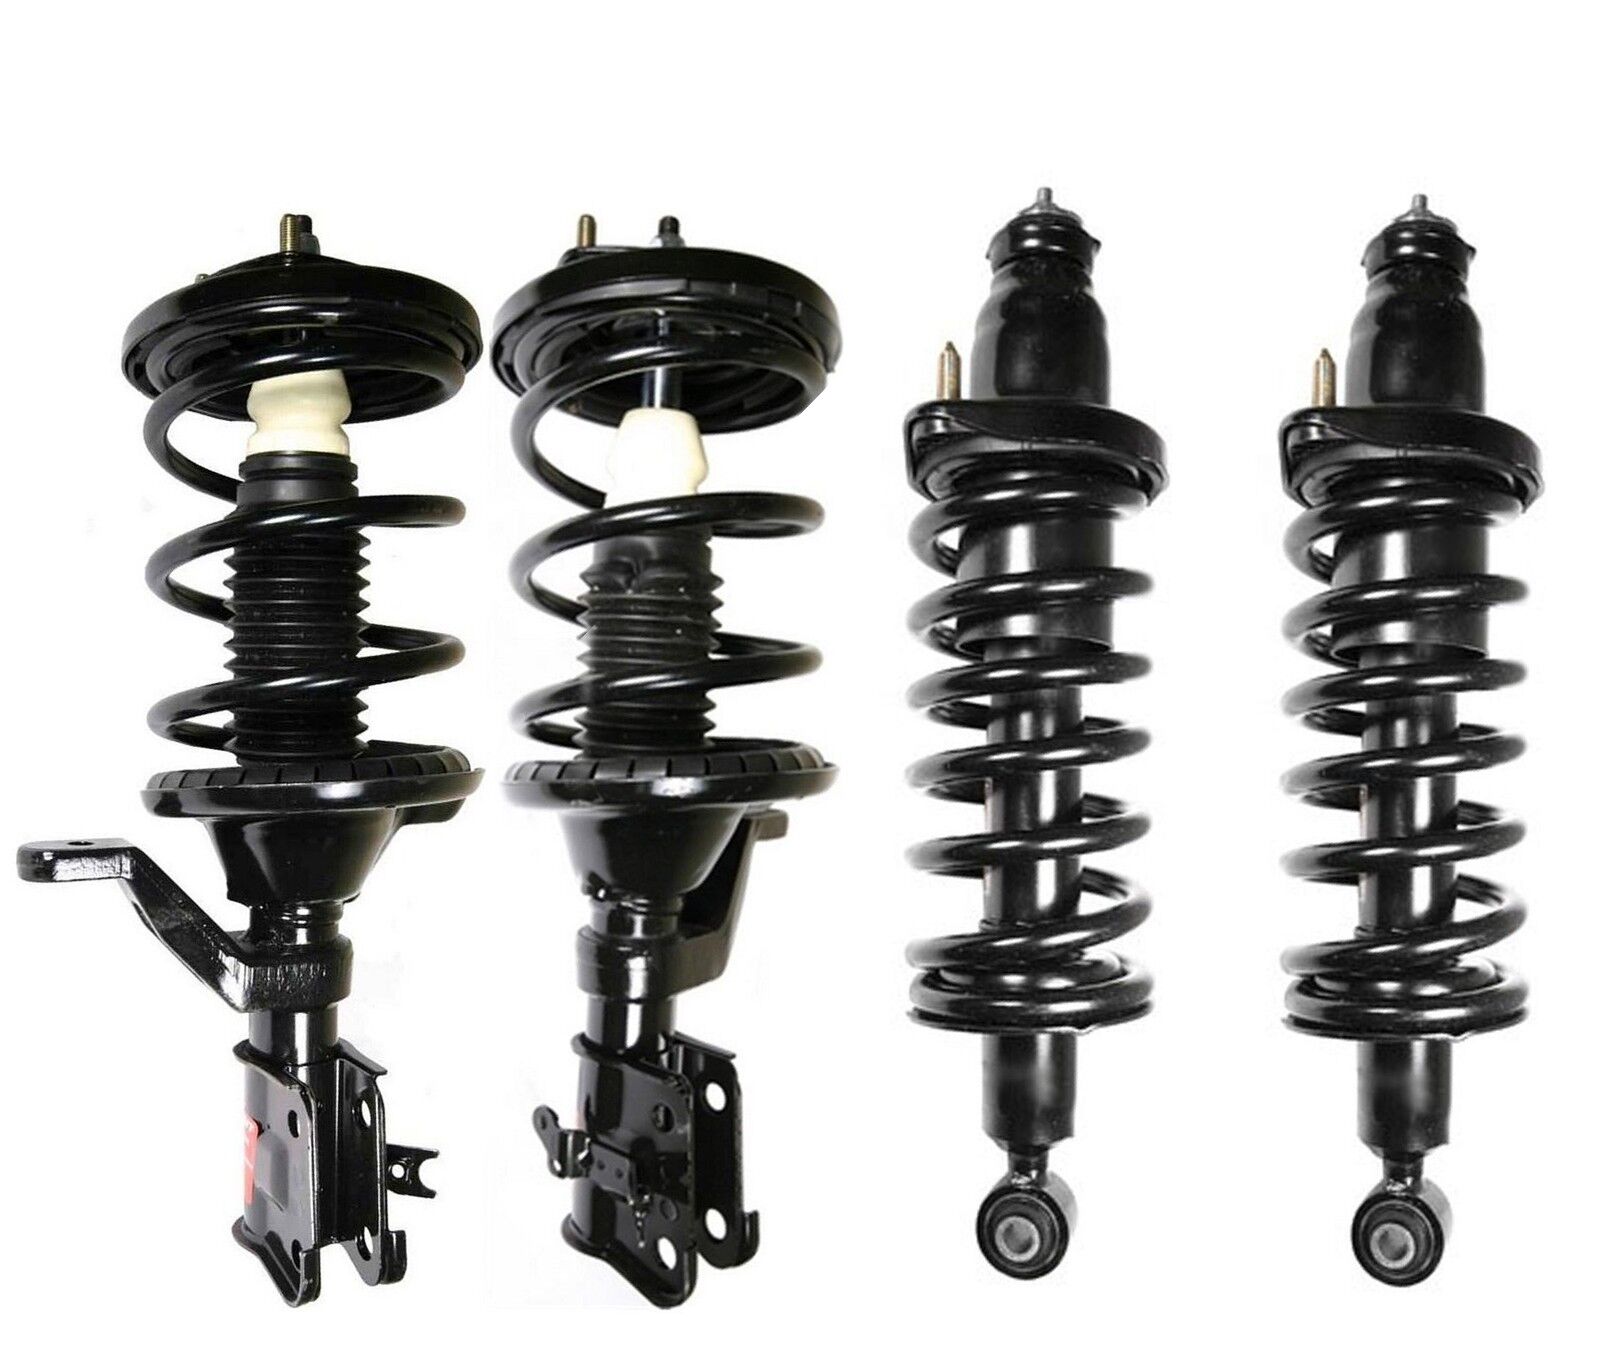 Full Set - 4 Complete Struts With Springs Mounts Fit 2001-2002 Honda Civic